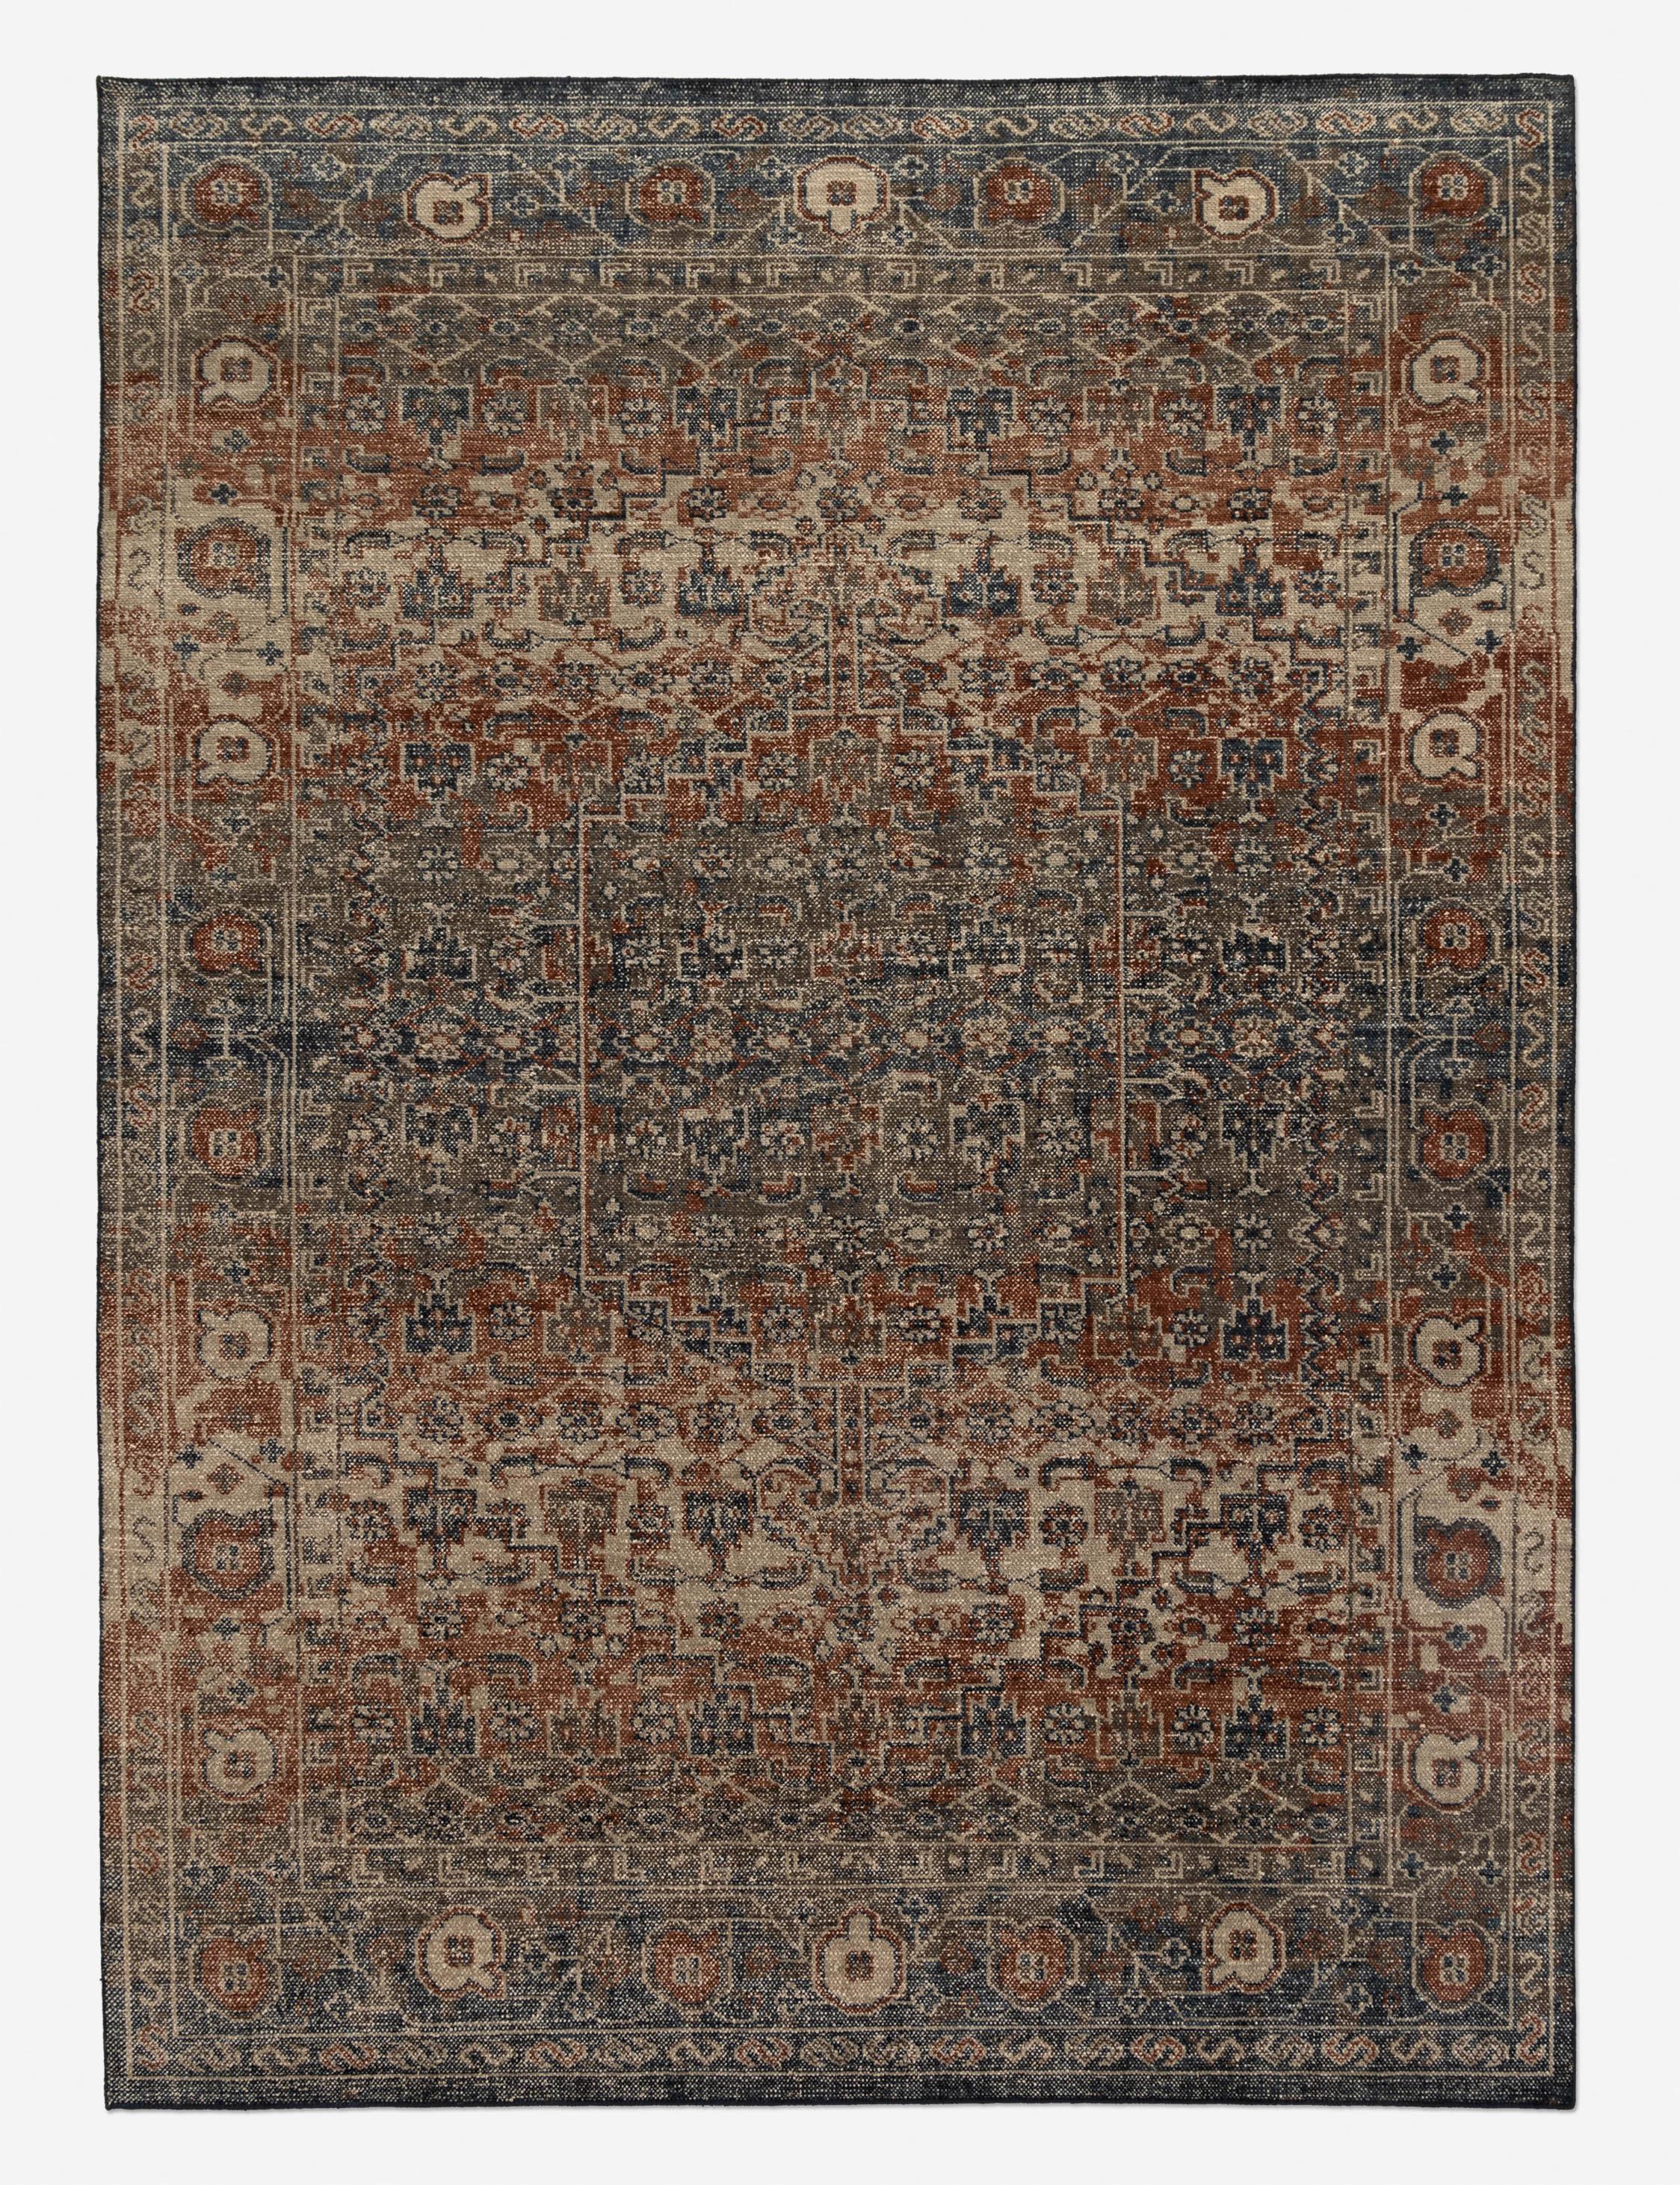 Arwen Traditional Hand-Knotted Wool Area Rug, 8' x 10', Earth Tones